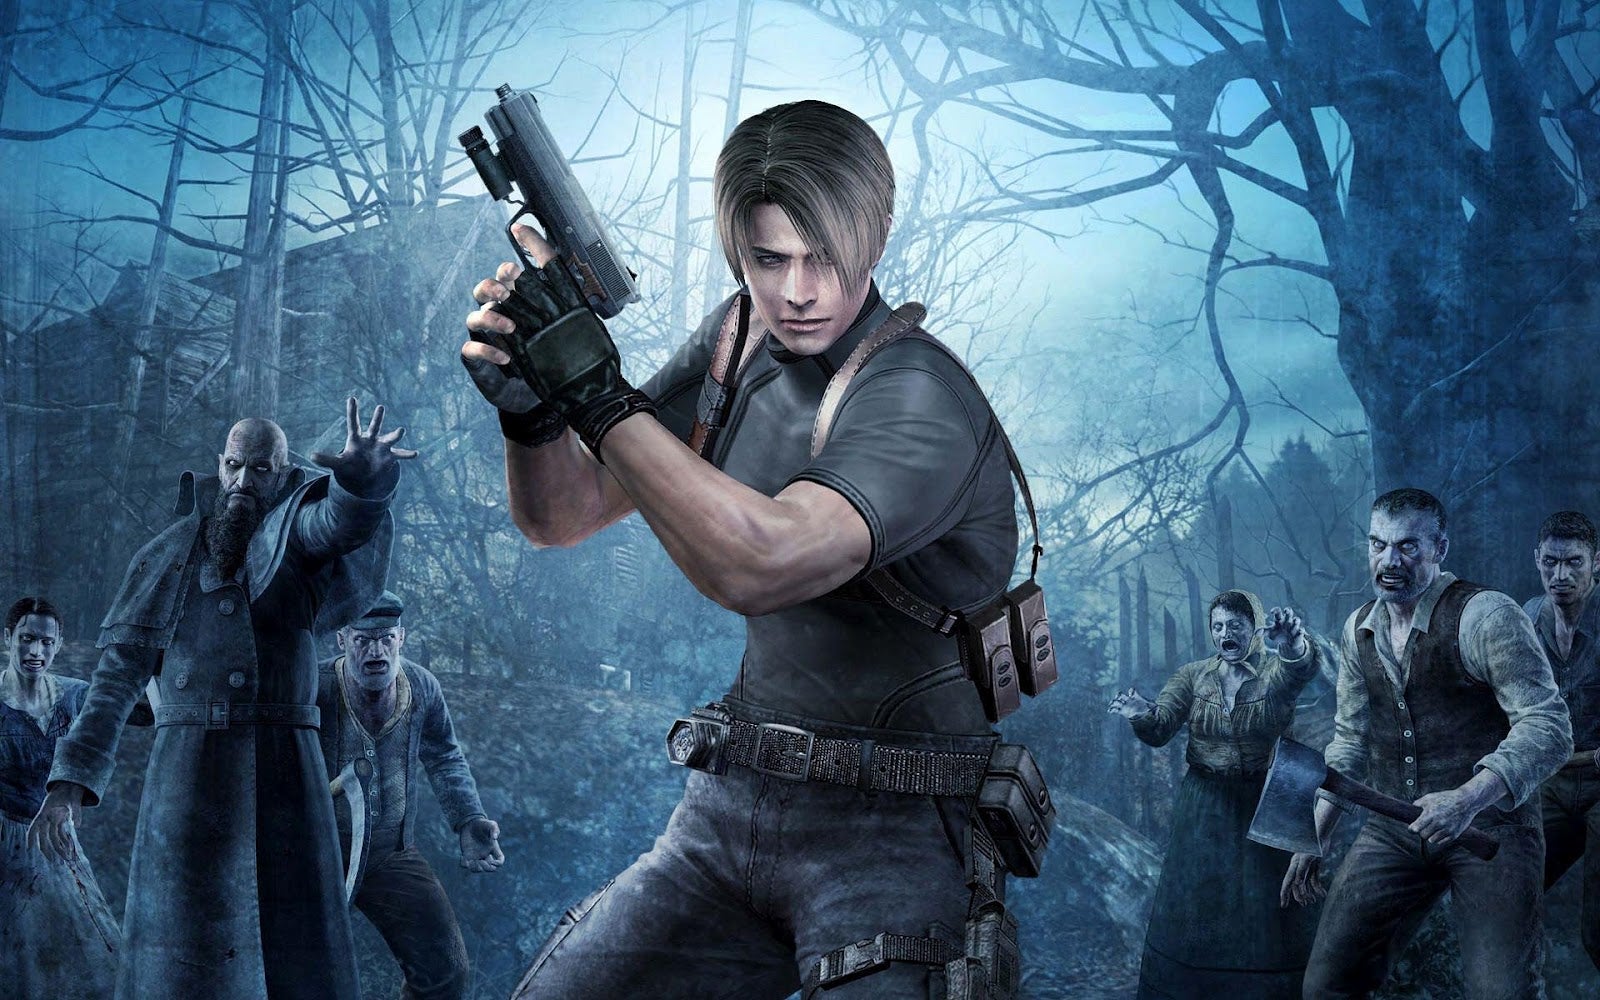 Image for Capcom rebooting Resident Evil 4 remake, project pushed to 2023 - report